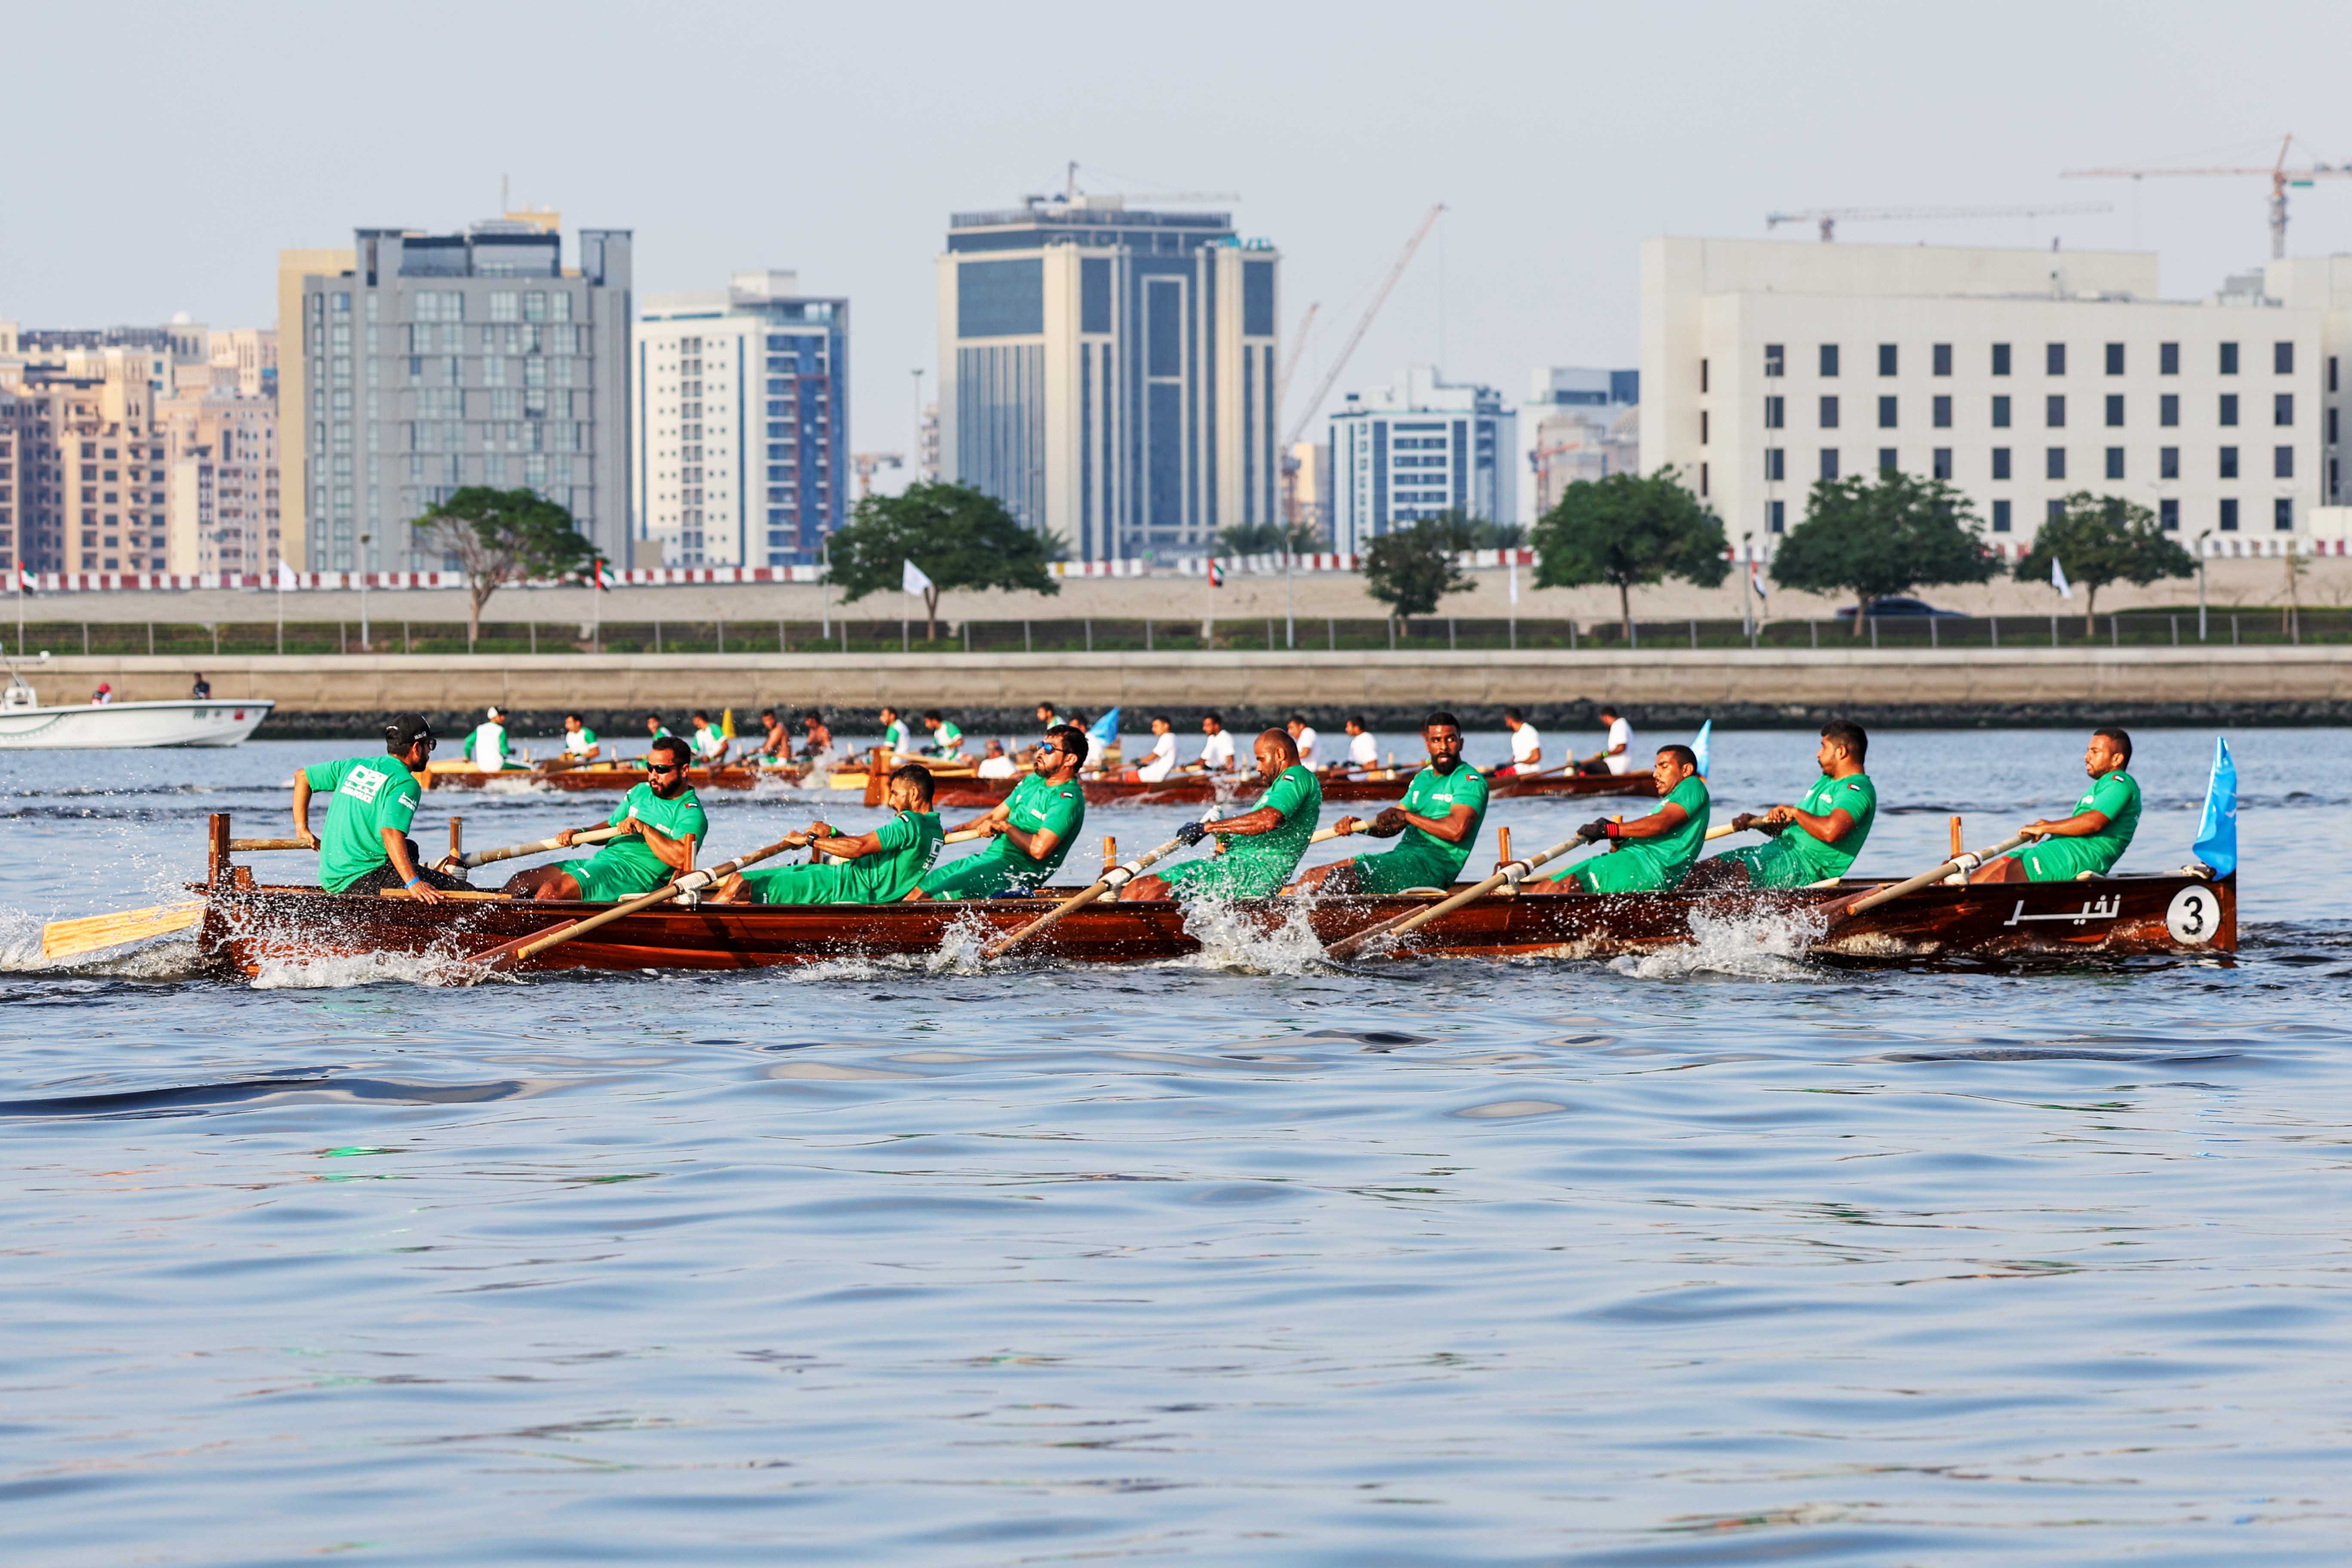 Registration Closes Today for the Second Round of Traditional Rowing Race